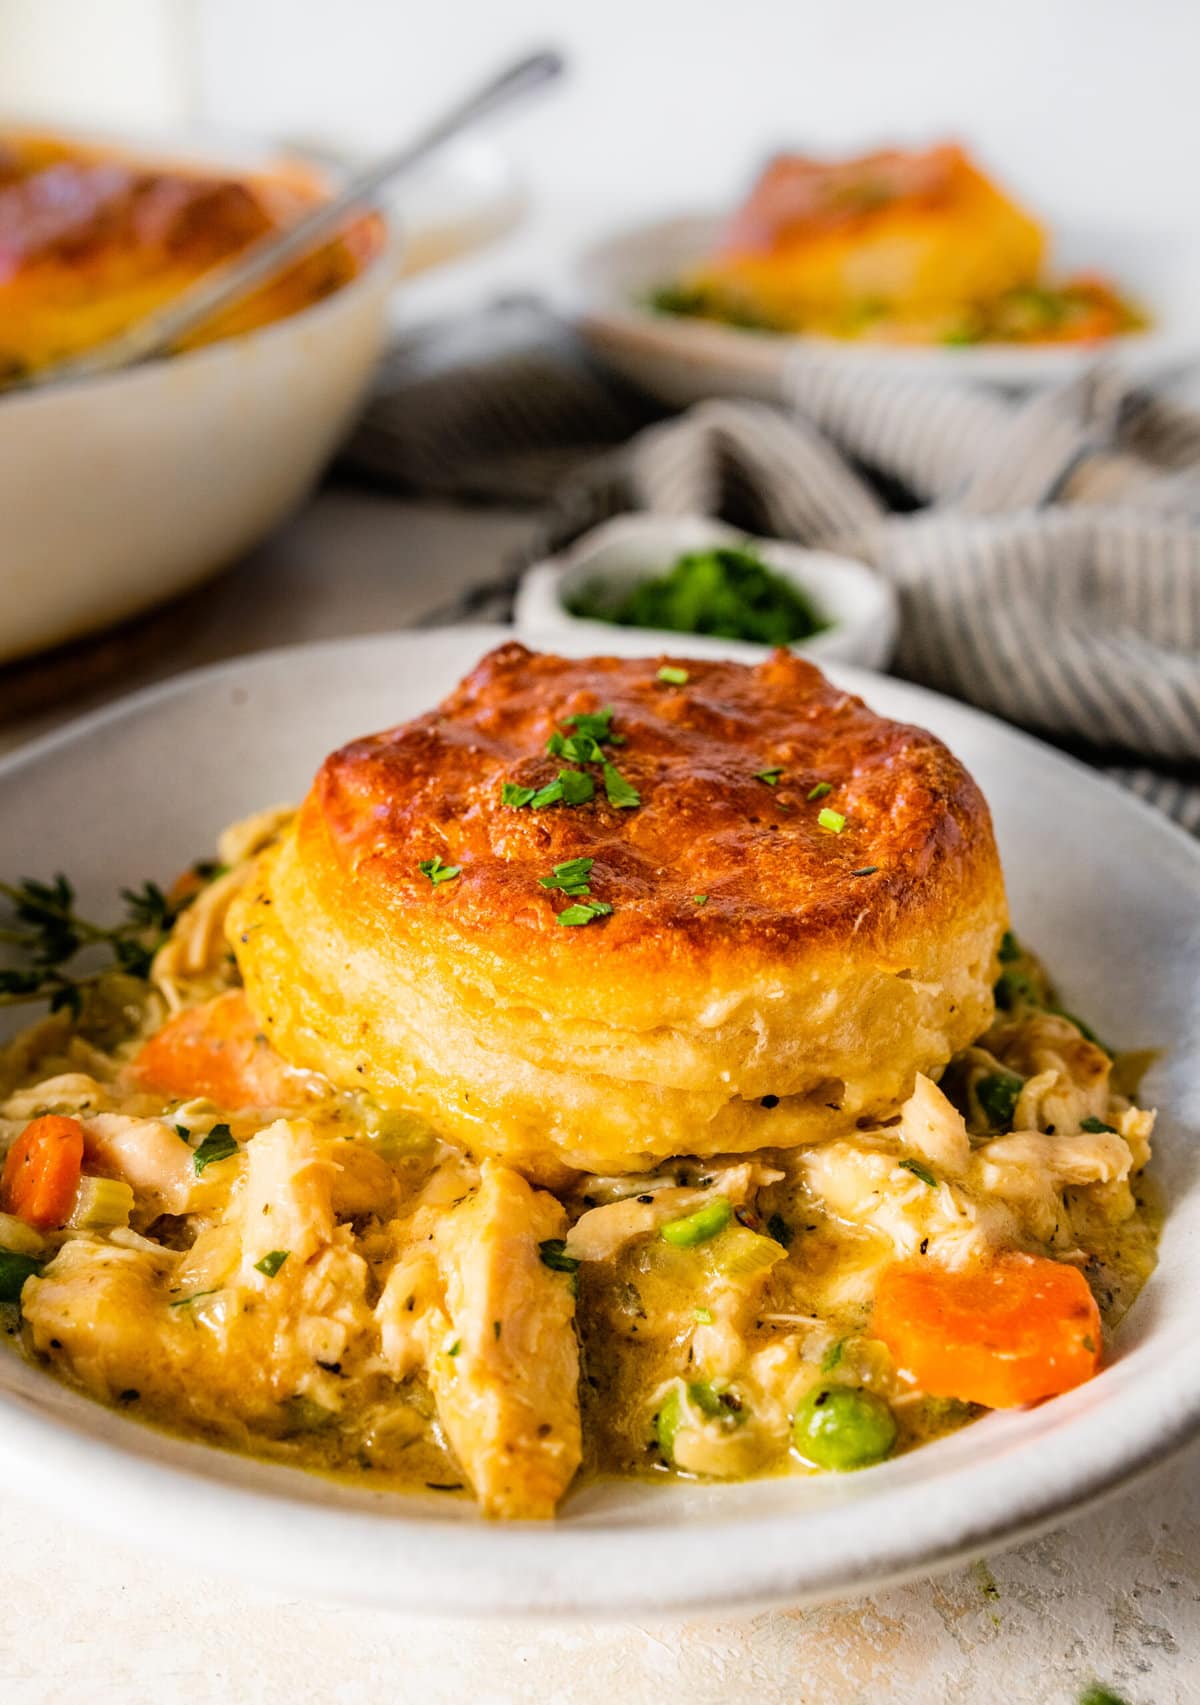 bowl of chicken pot pie casserole with biscuits in a bowl. One biscuit in the bowl with filling.